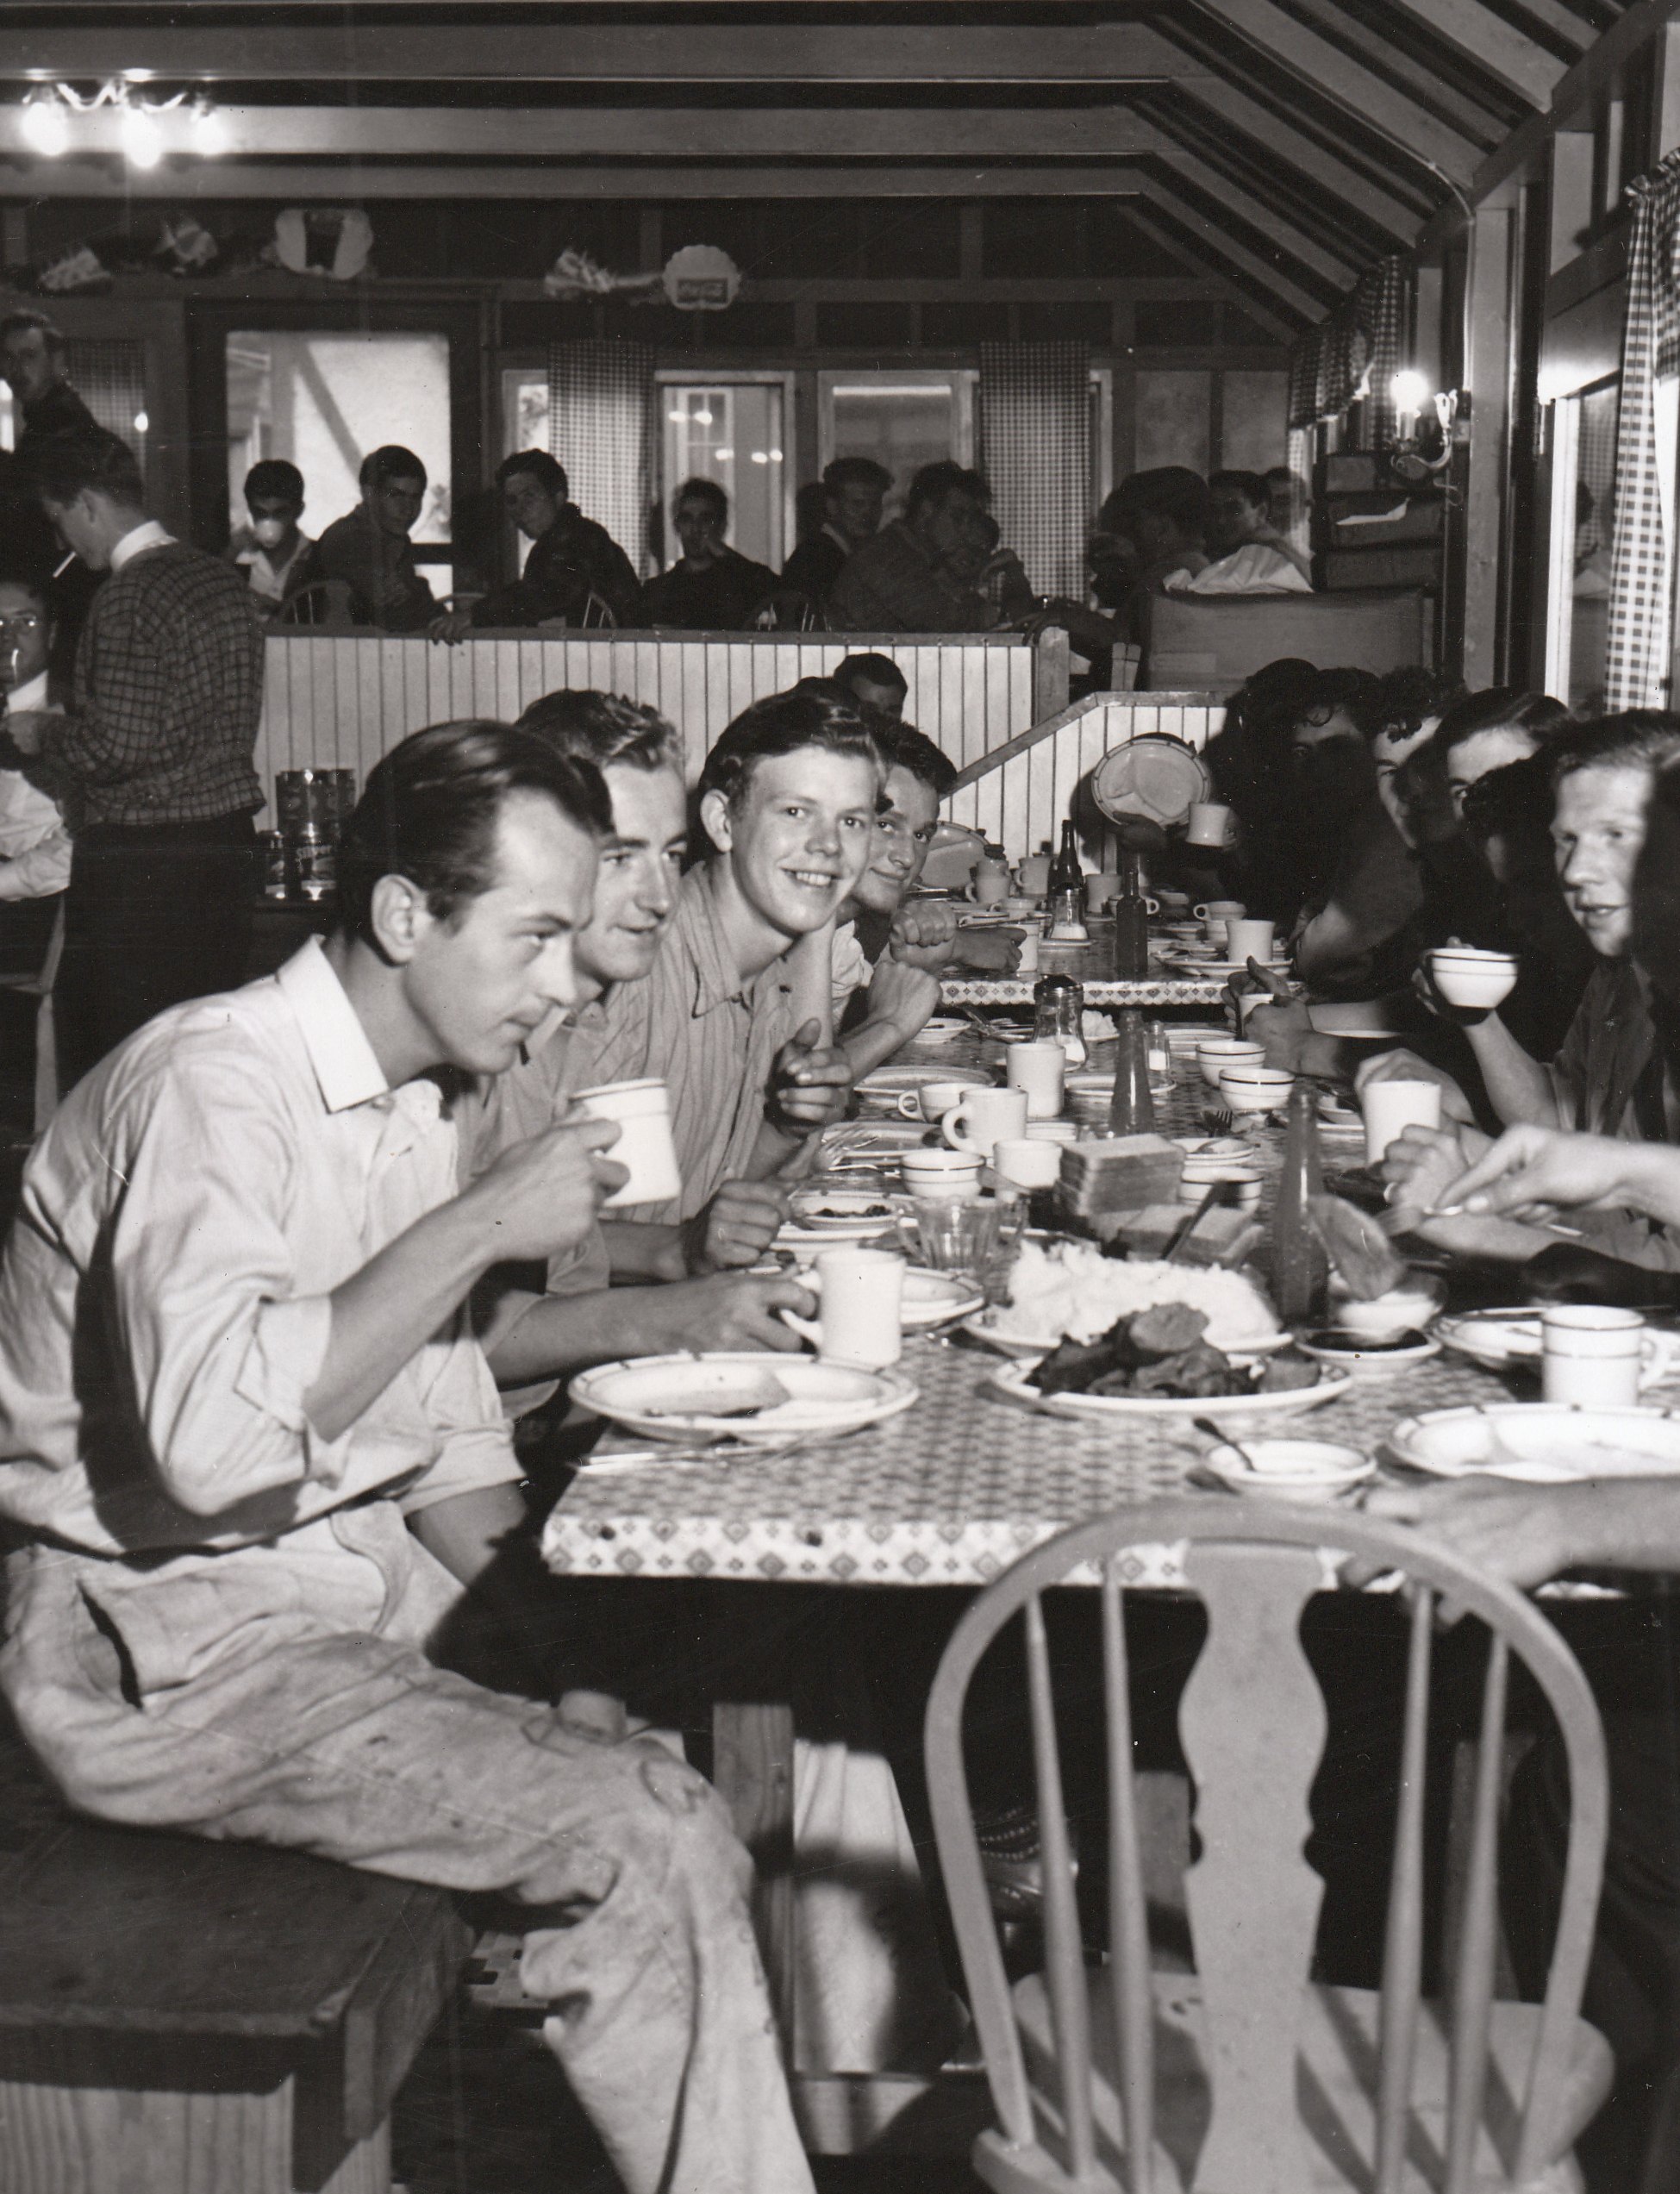 NYA workers having dinner together in San Diego. Employment, instead of the dole, seems to suit them just fine. Photo courtesy of the National Archives (ca. 1935-1943).